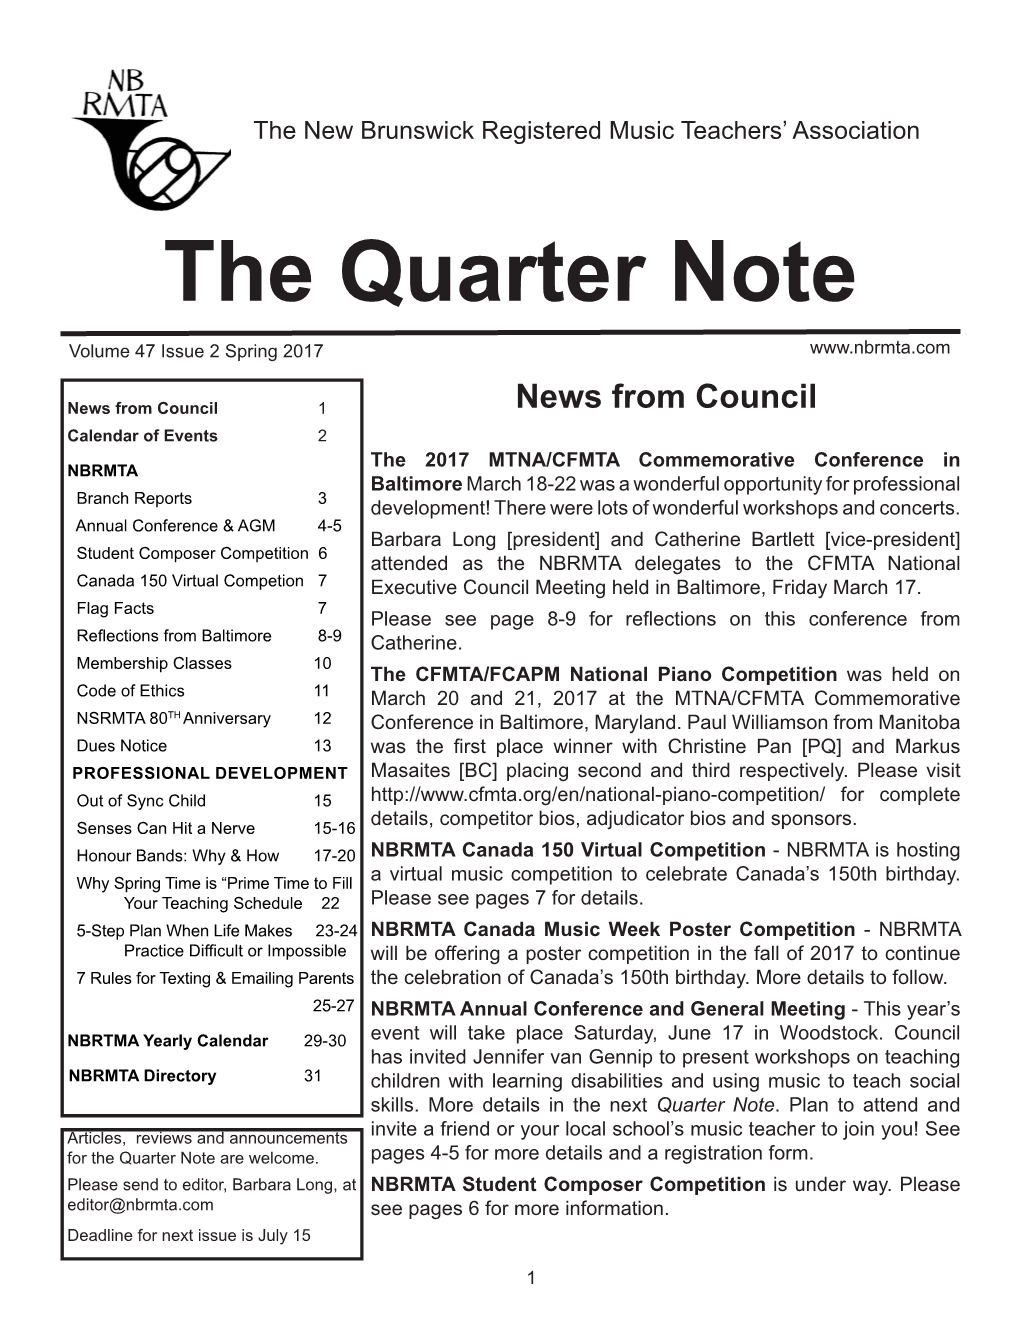 The Quarter Note Volume 47 Issue 2 Spring 2017